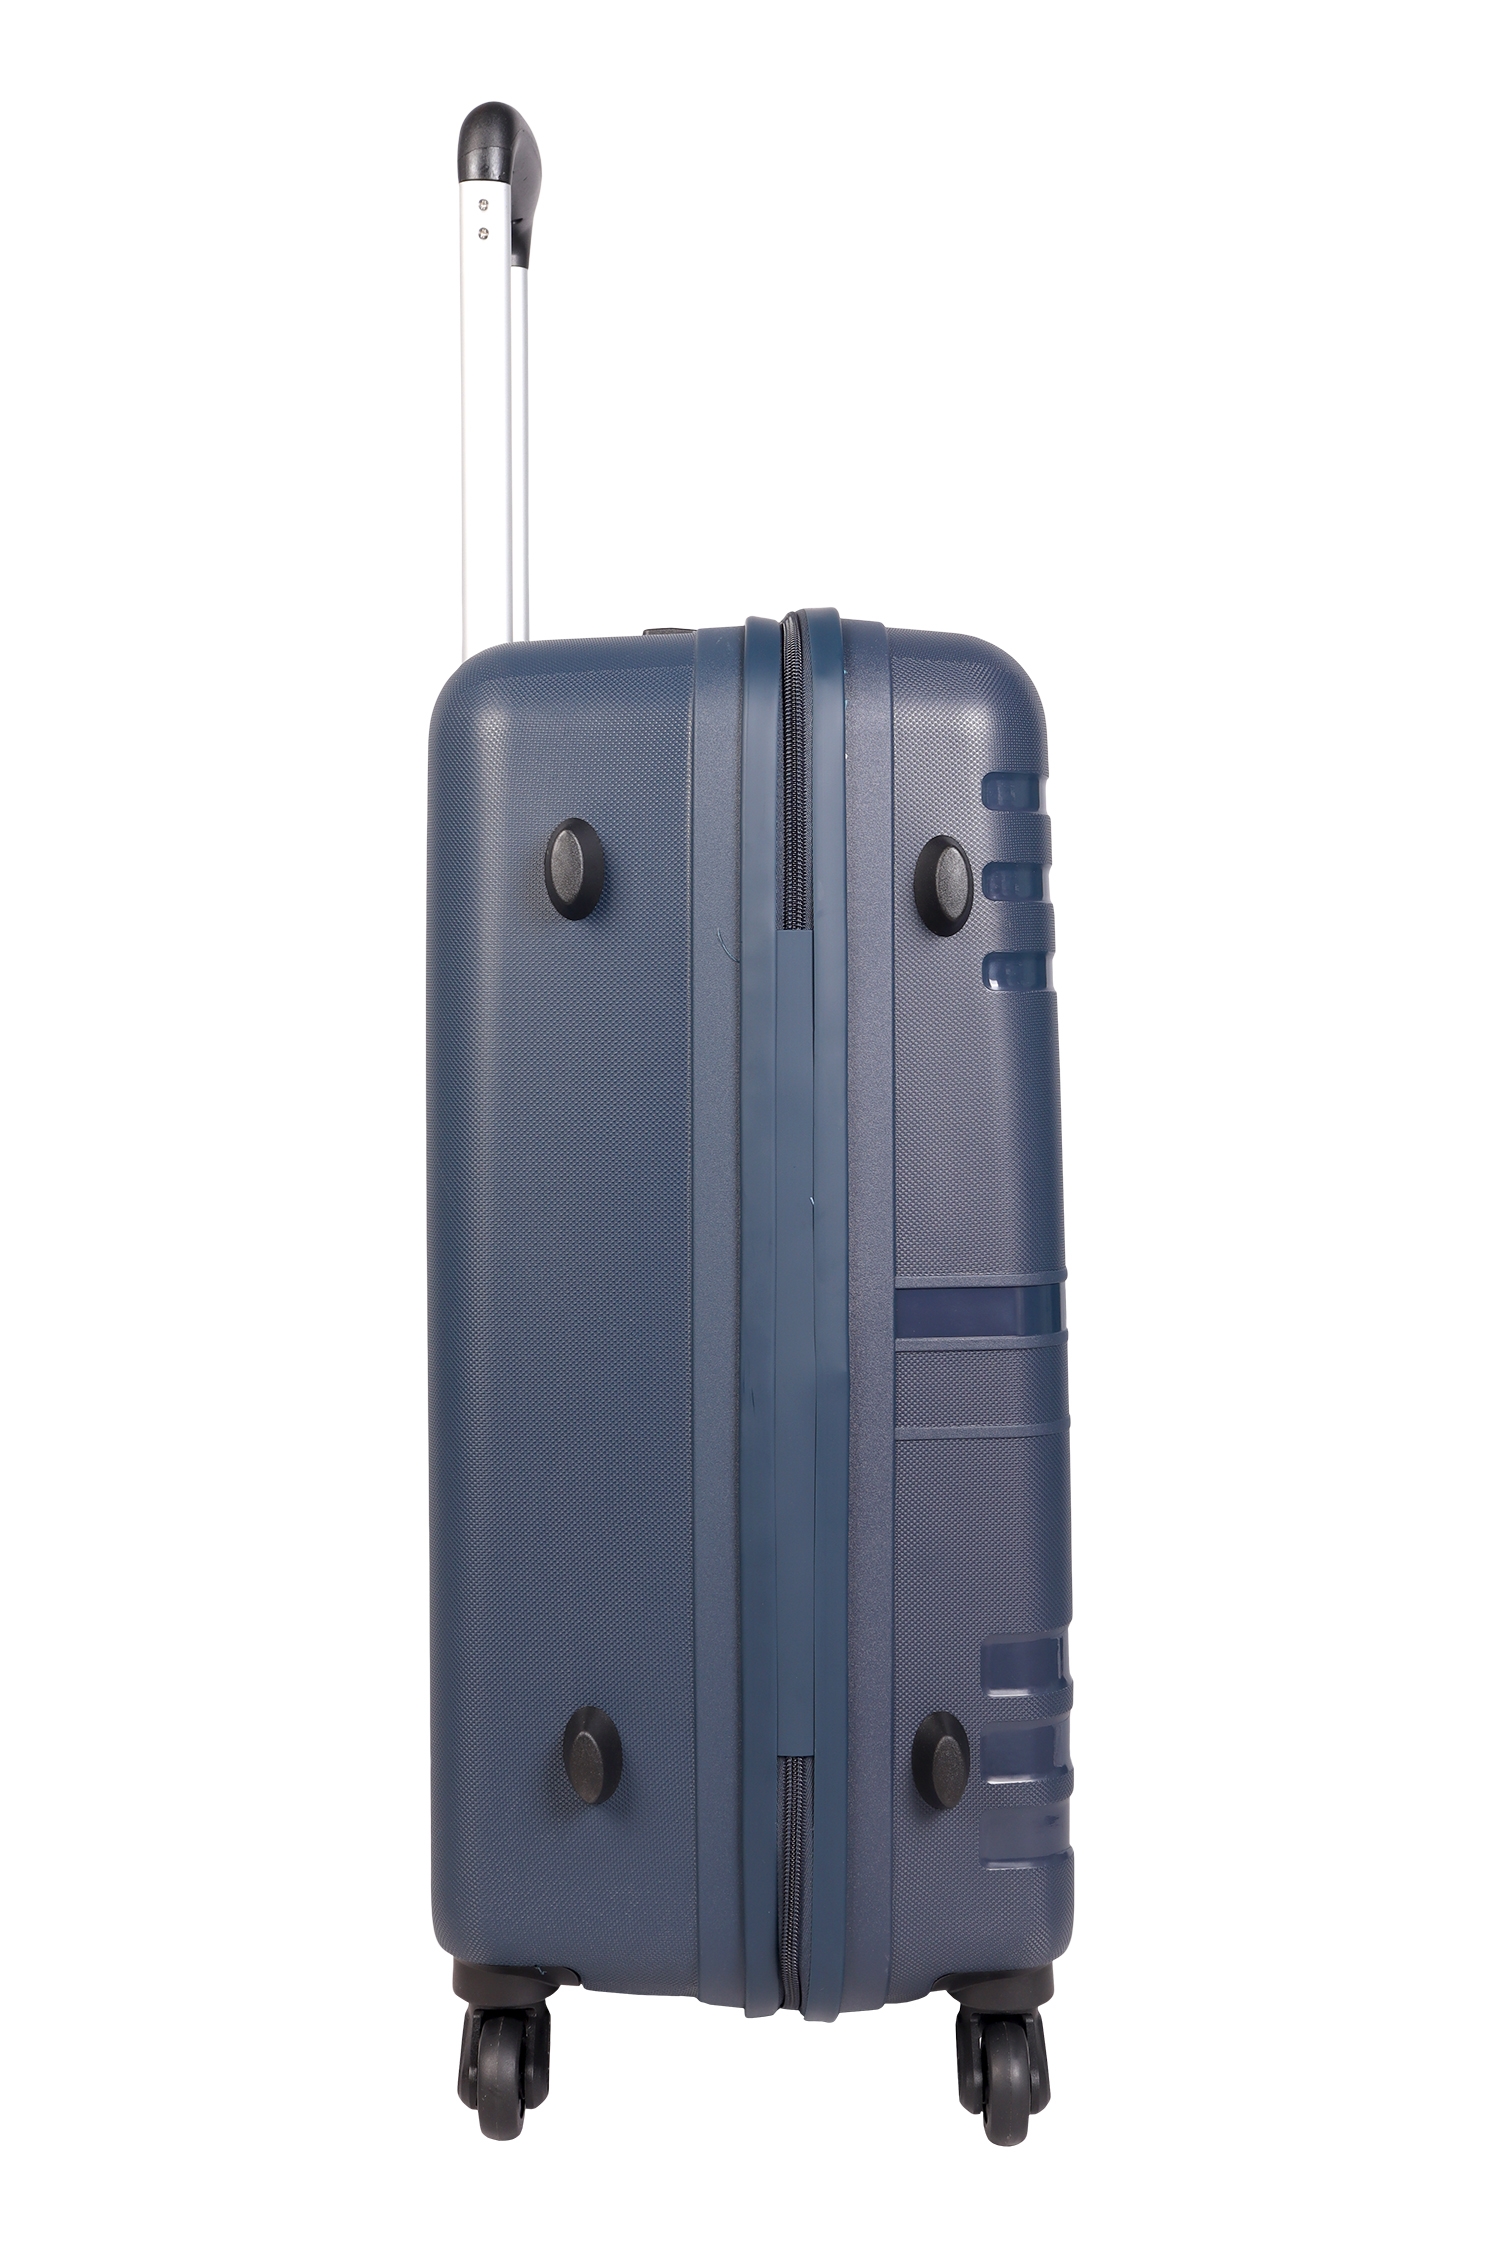 Aristocrat Sienna Polycarbonate 77 Cms Blue Hardsided Check-In Luggage,  Large : Amazon.in: Fashion